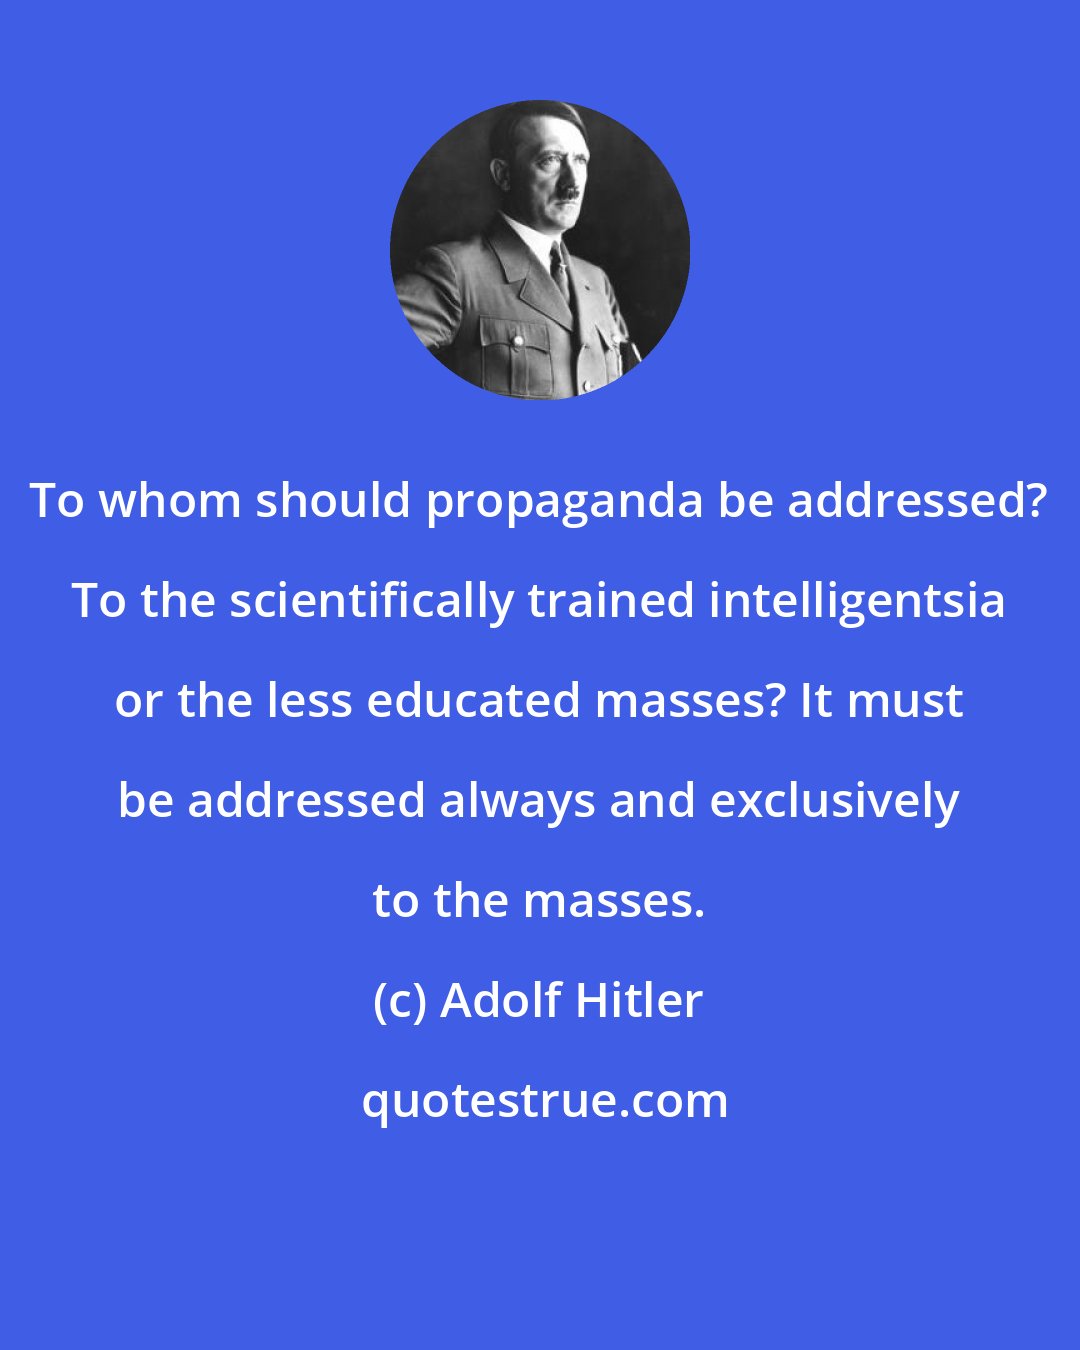 Adolf Hitler: To whom should propaganda be addressed? To the scientifically trained intelligentsia or the less educated masses? It must be addressed always and exclusively to the masses.